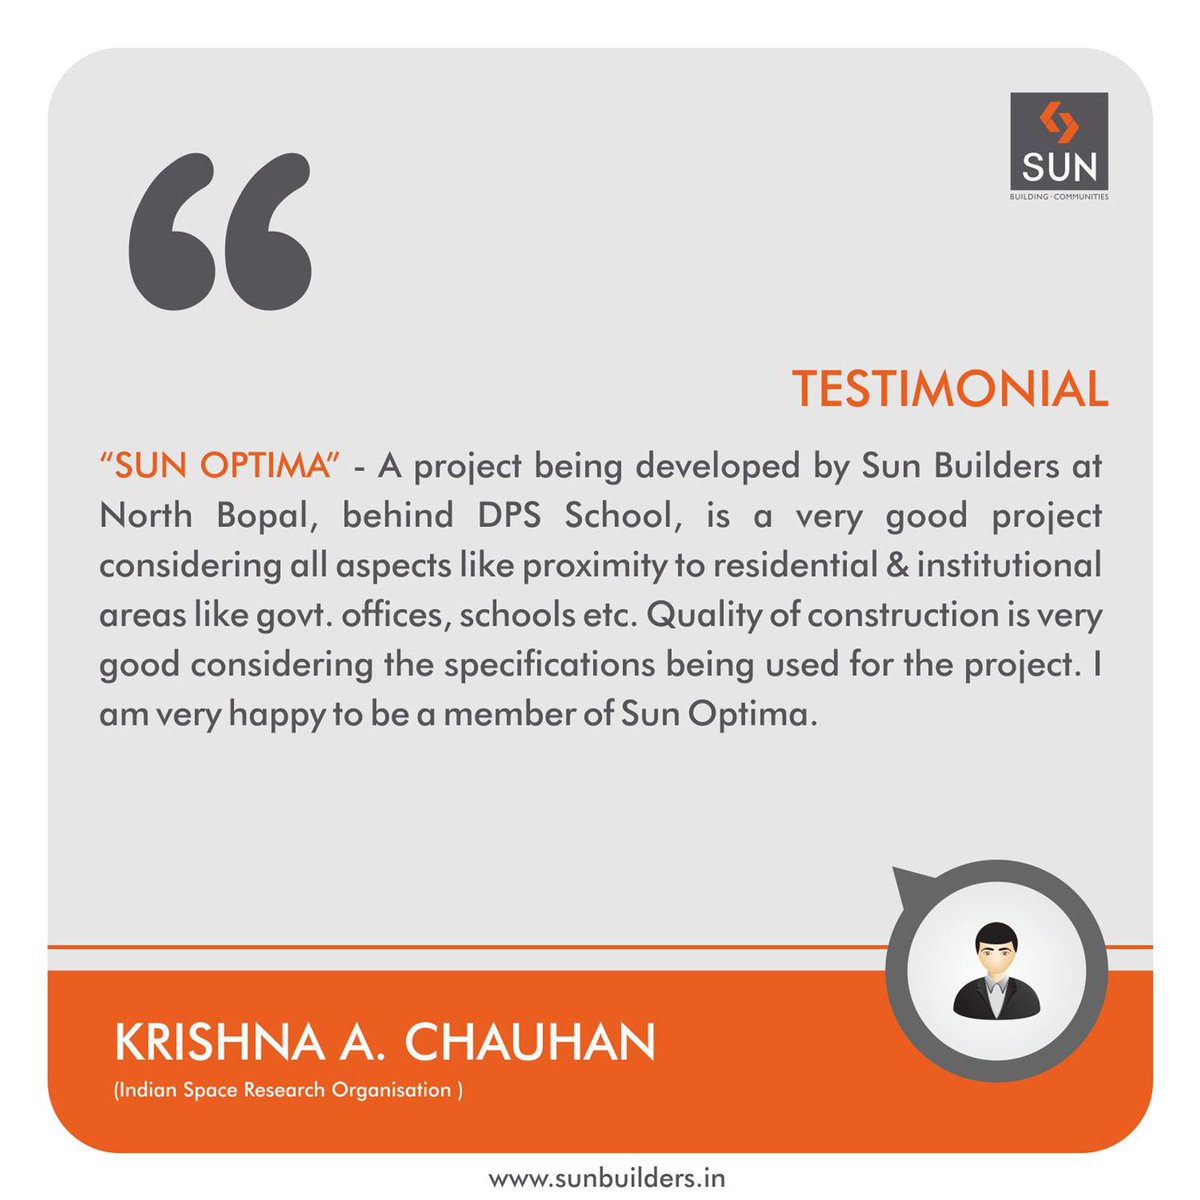 We are thankful to Mr. Krishna A. Chauhan for sharing his positive feedback with us. https://t.co/Dk1CQoDzOc